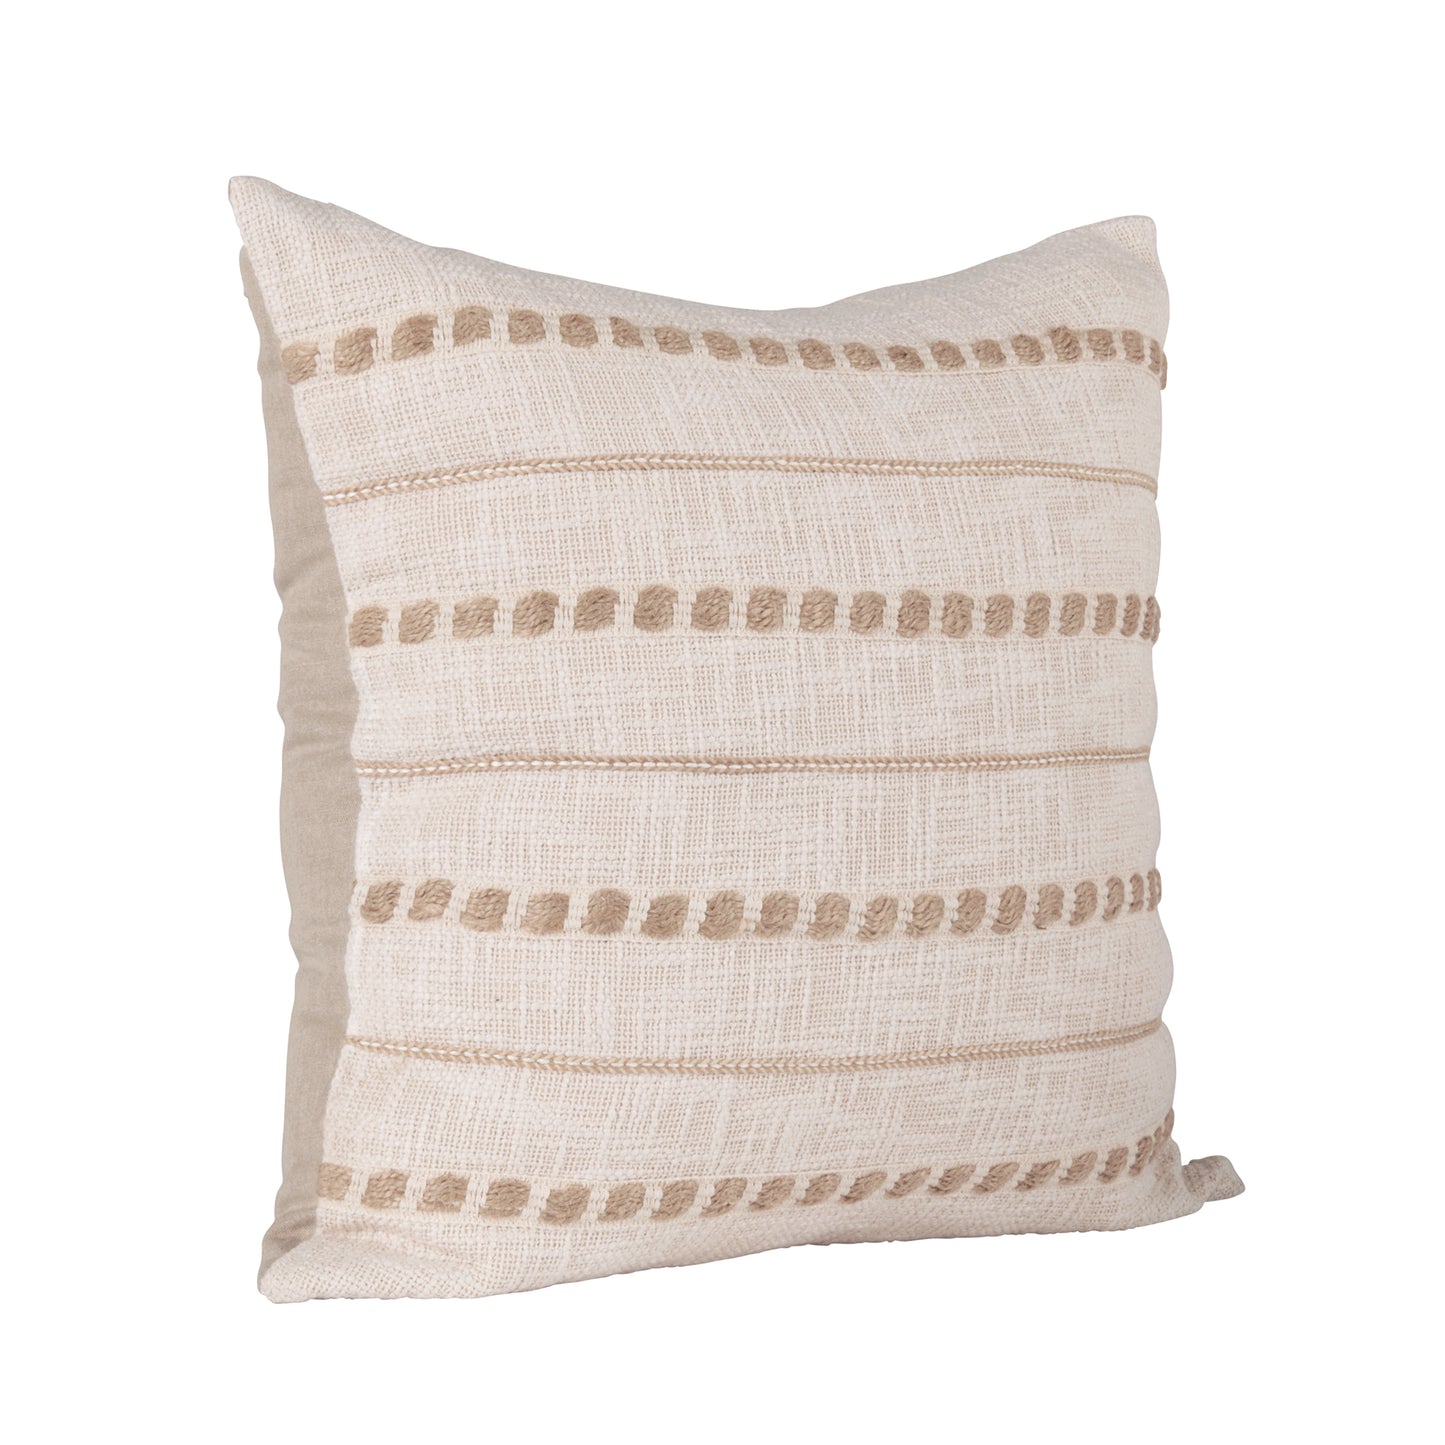 22" Ivory Pillow